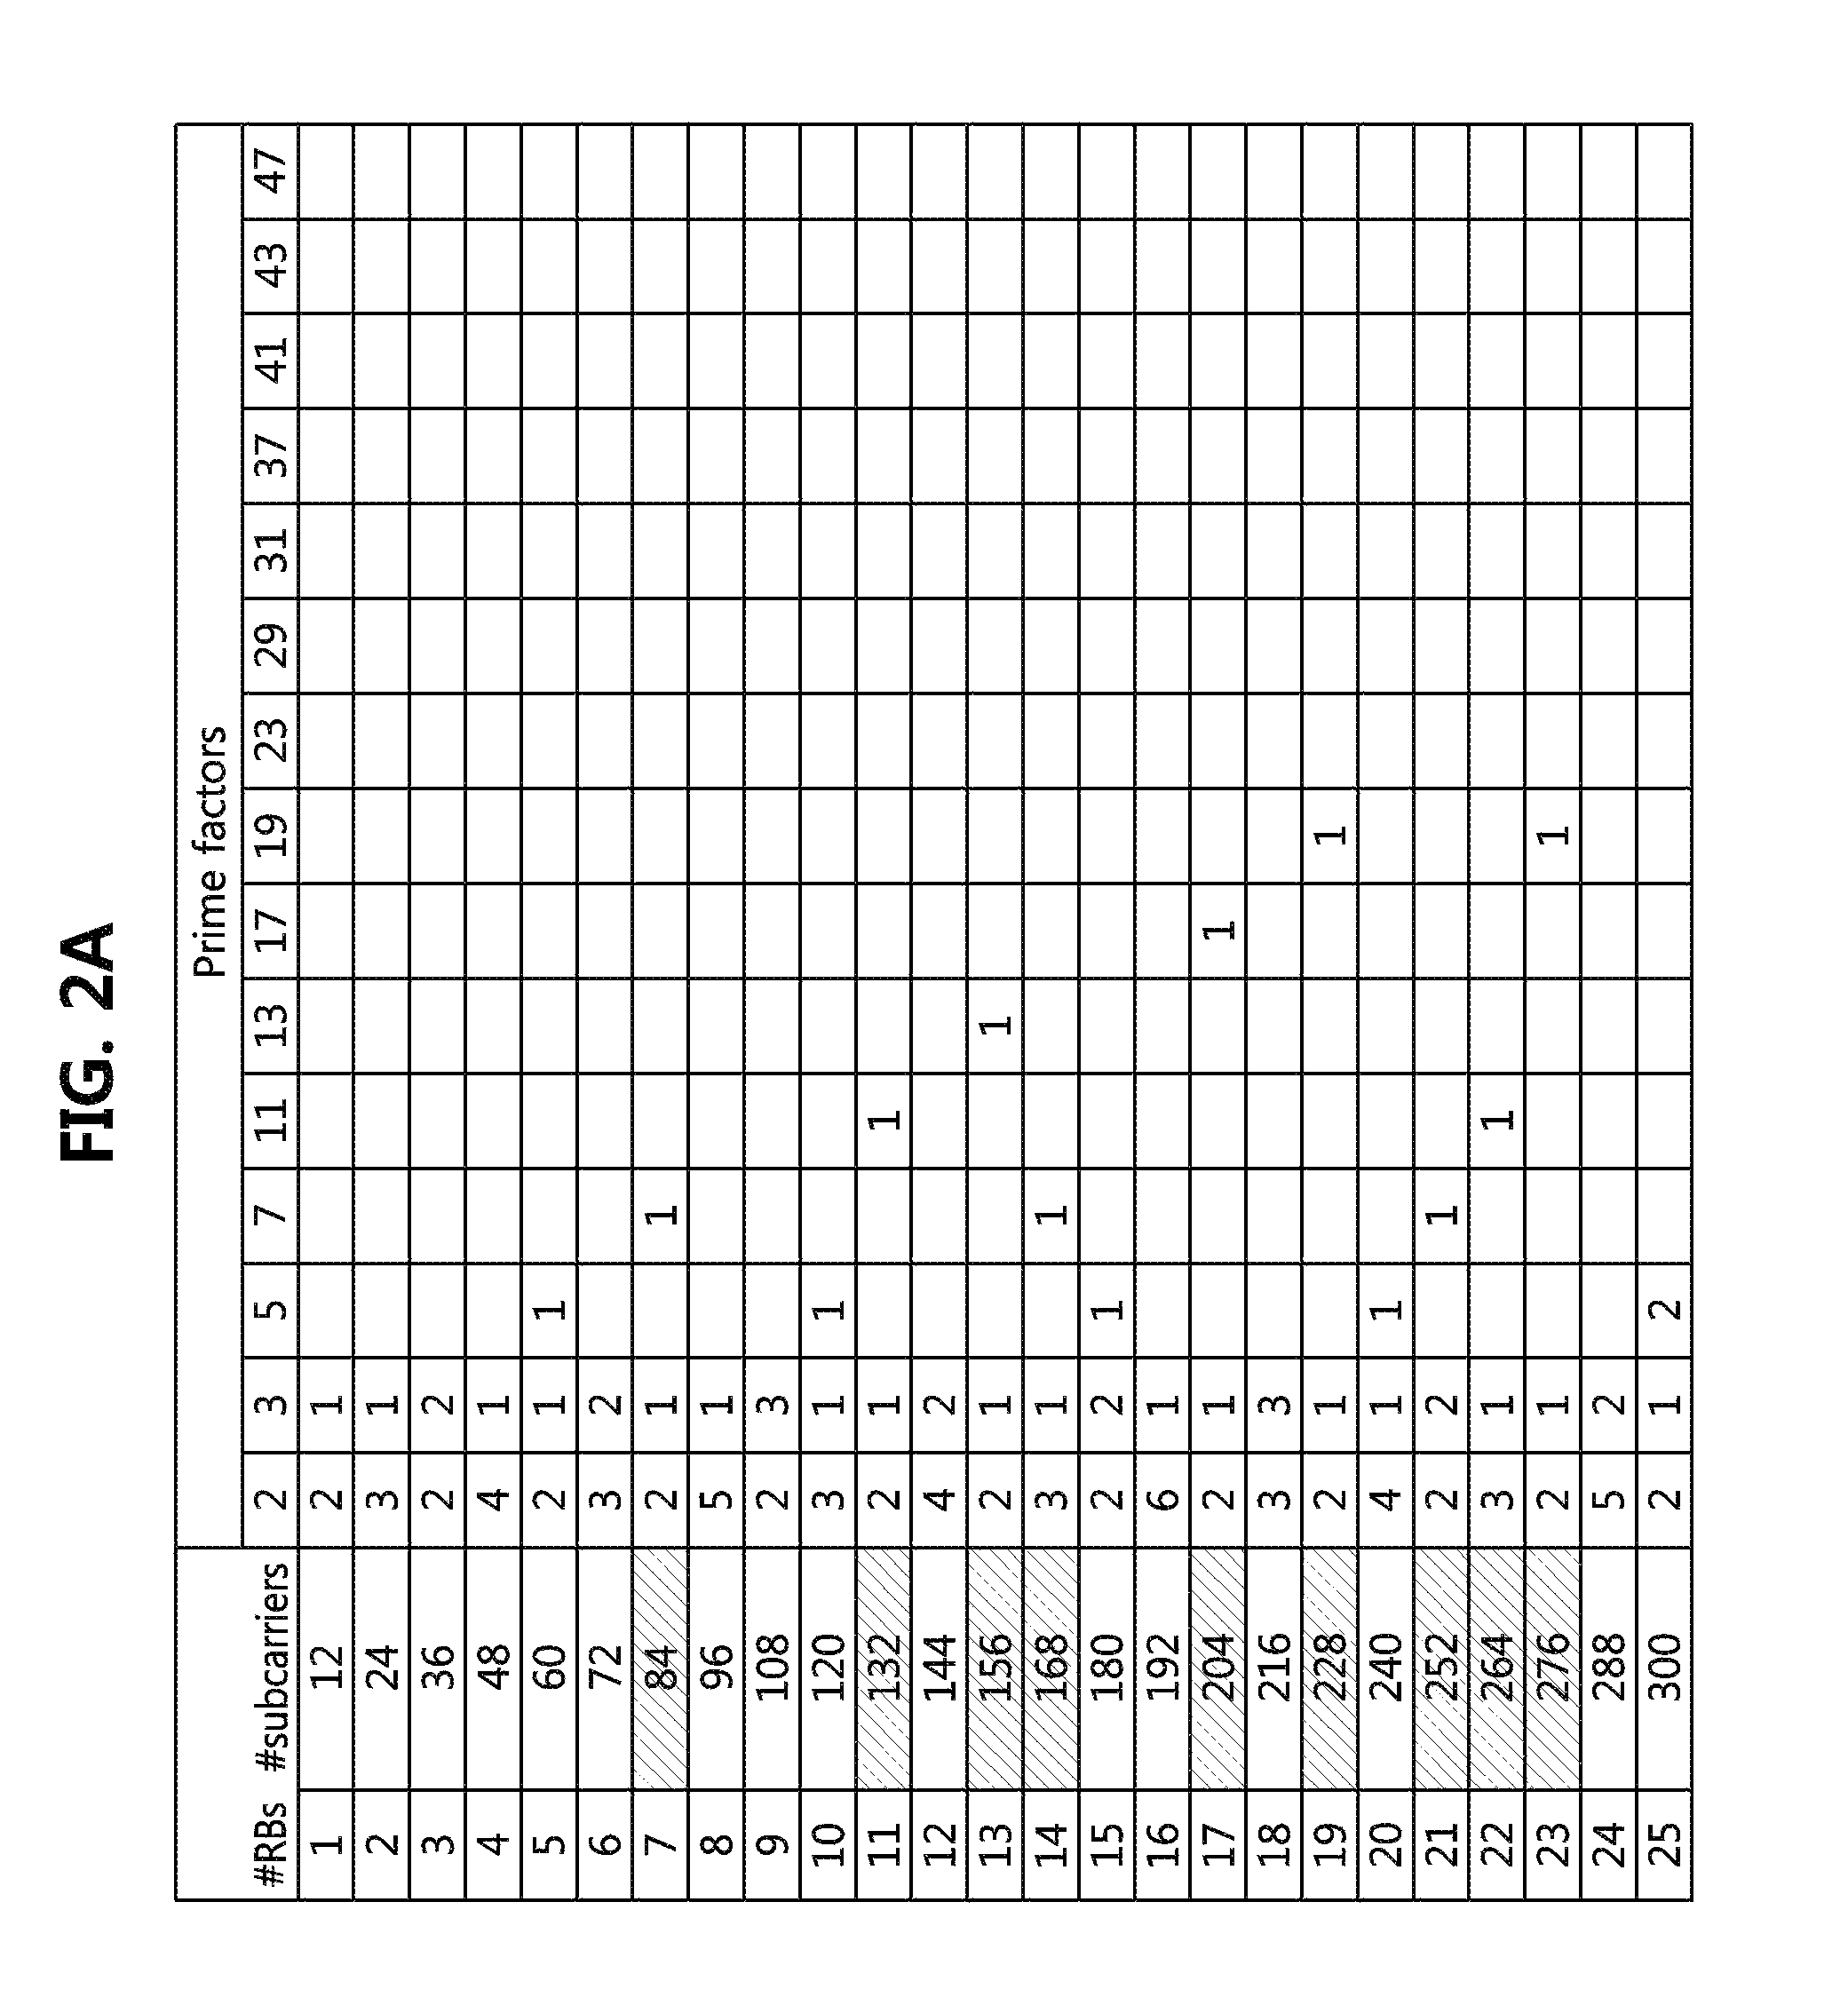 Transmitting and receiving apparatuses for frequency division multiple access